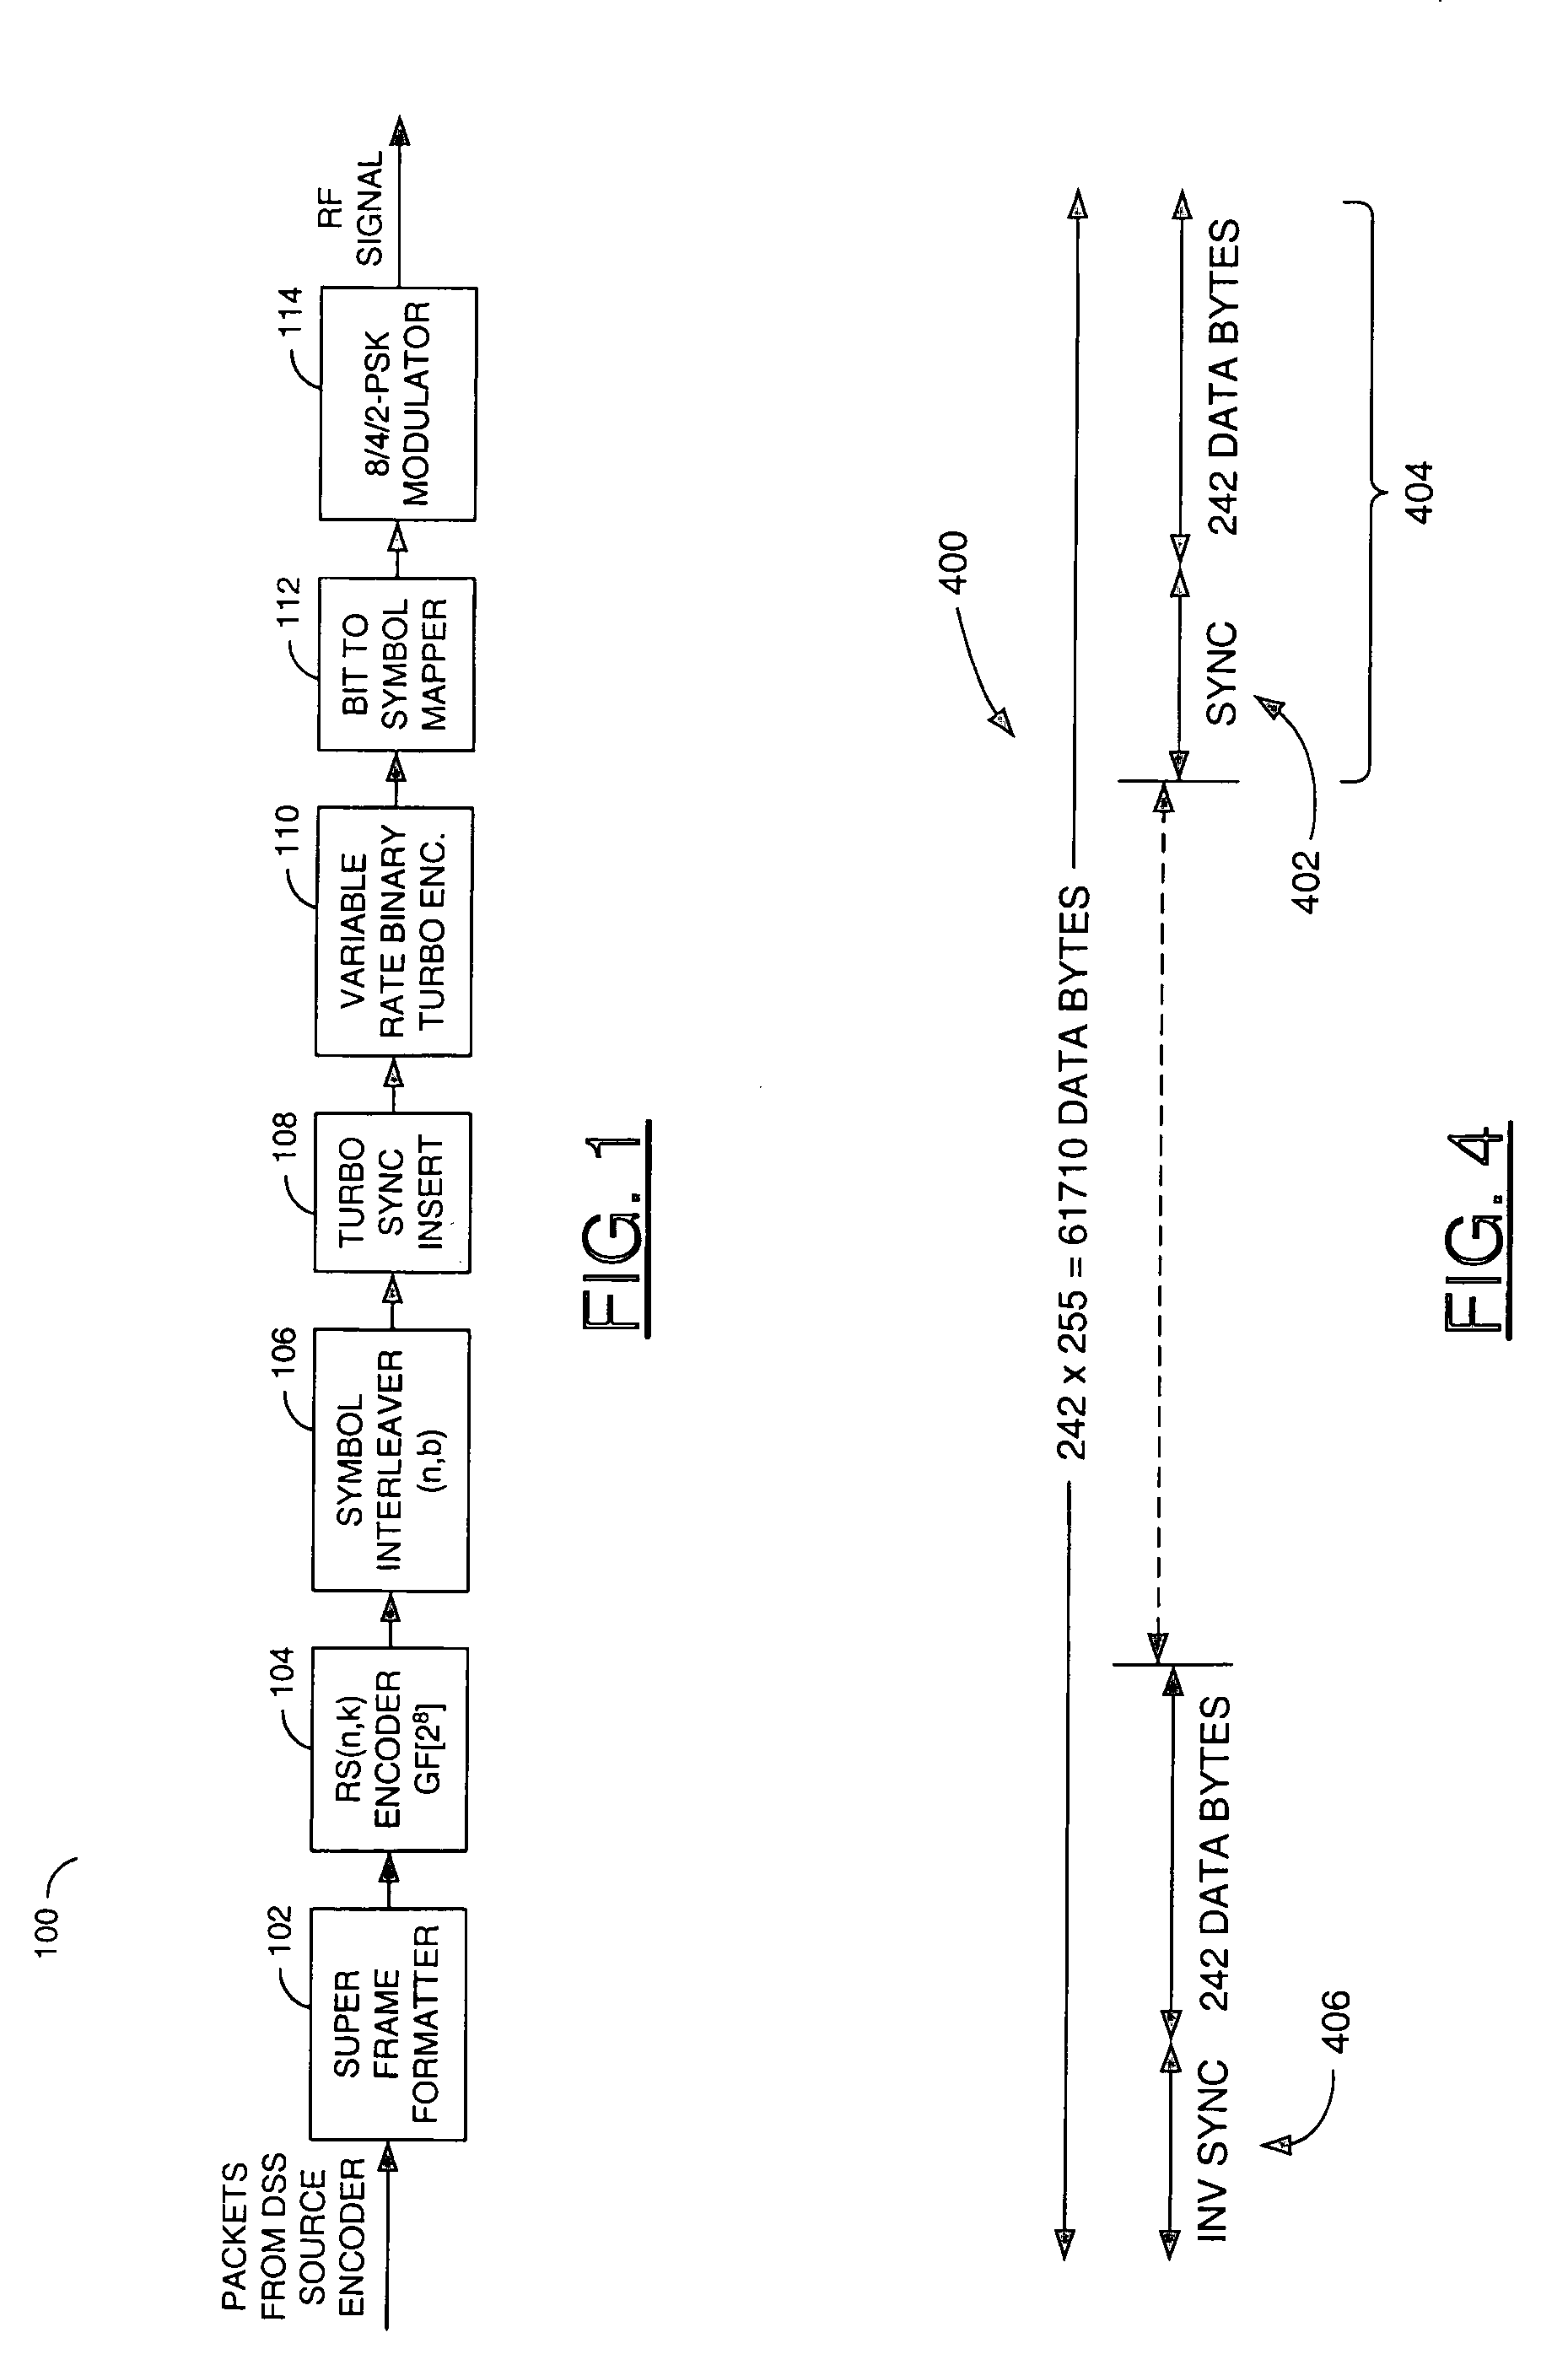 System to efficiently transmit two HDTV channels over satellite using turbo coded 8PSK modulation for DSS compliant receivers